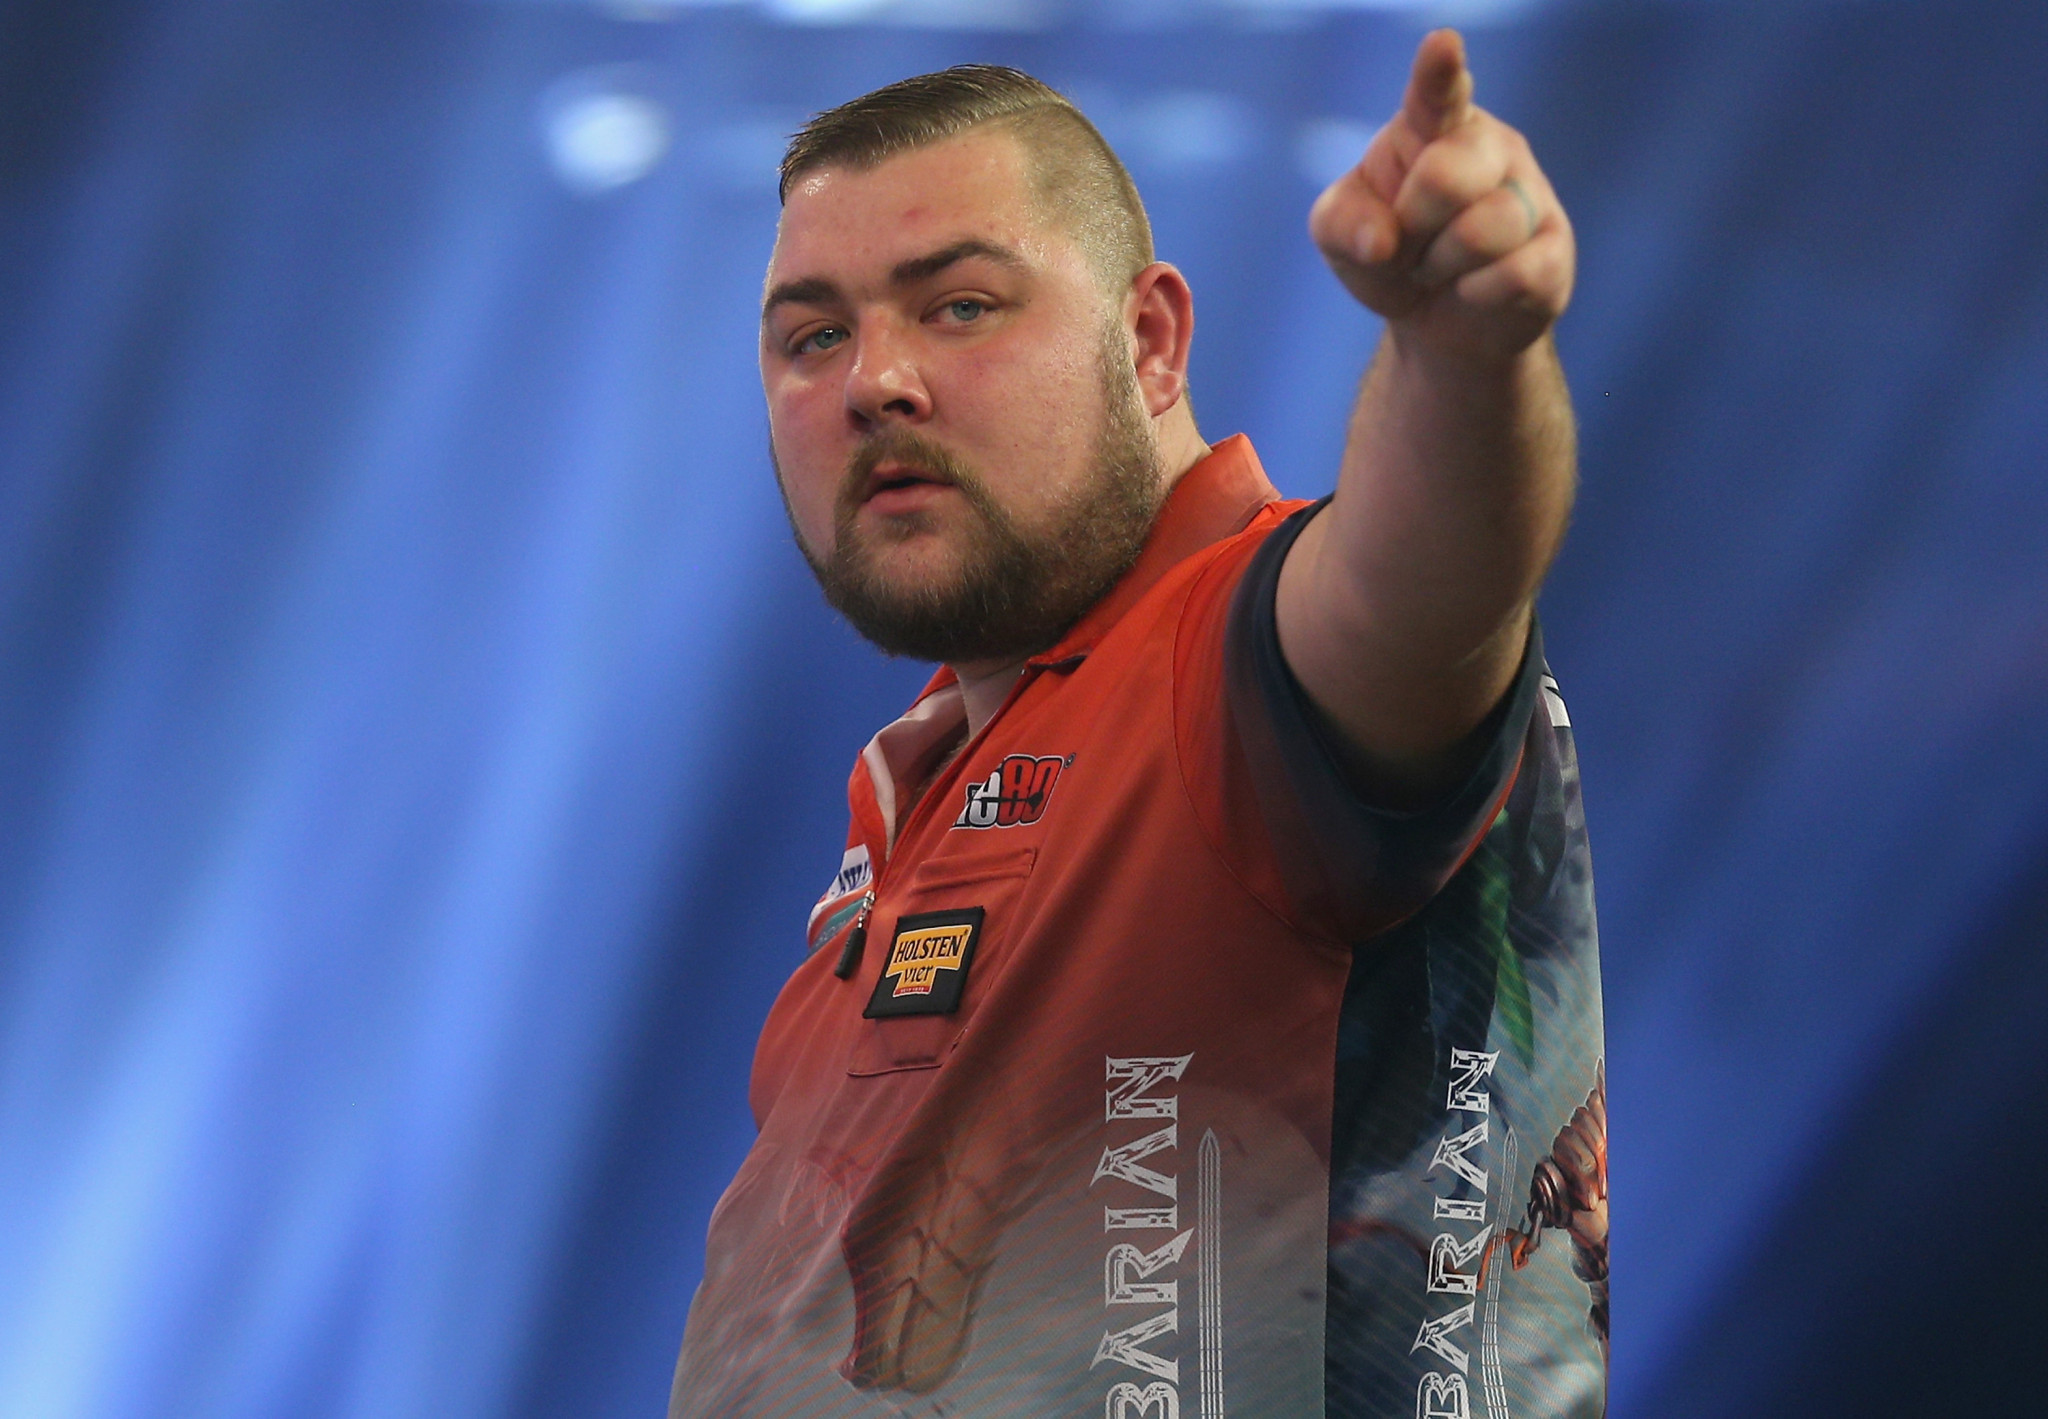 Whitehead stuns eighth seed Menzies to reach second round at BDO World Championship